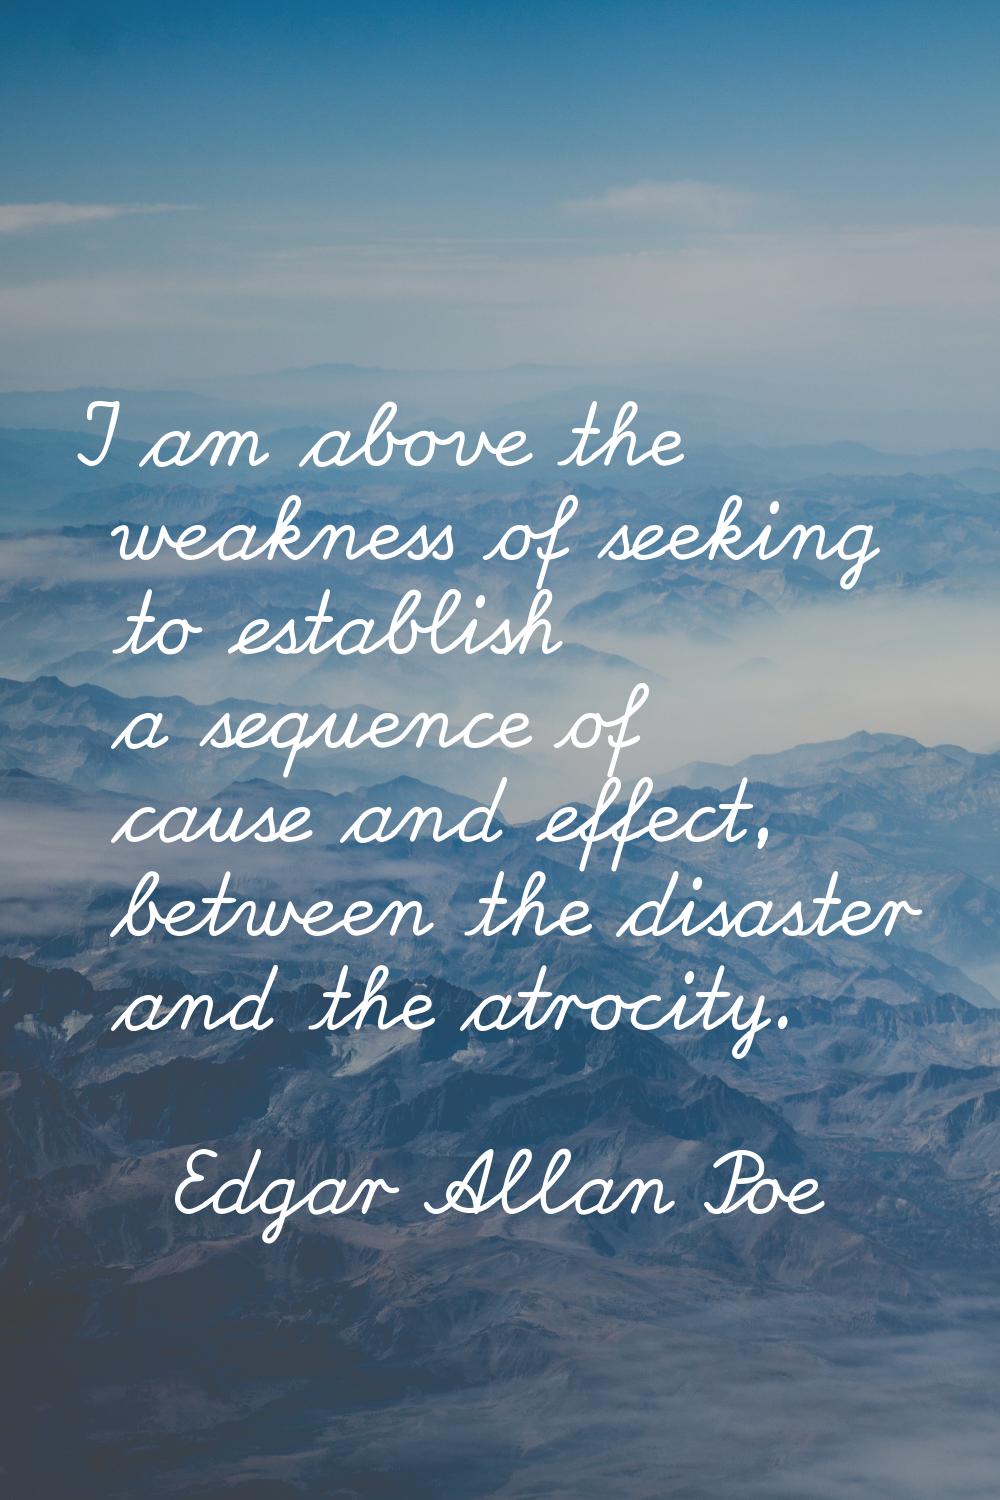 I am above the weakness of seeking to establish a sequence of cause and effect, between the disaste